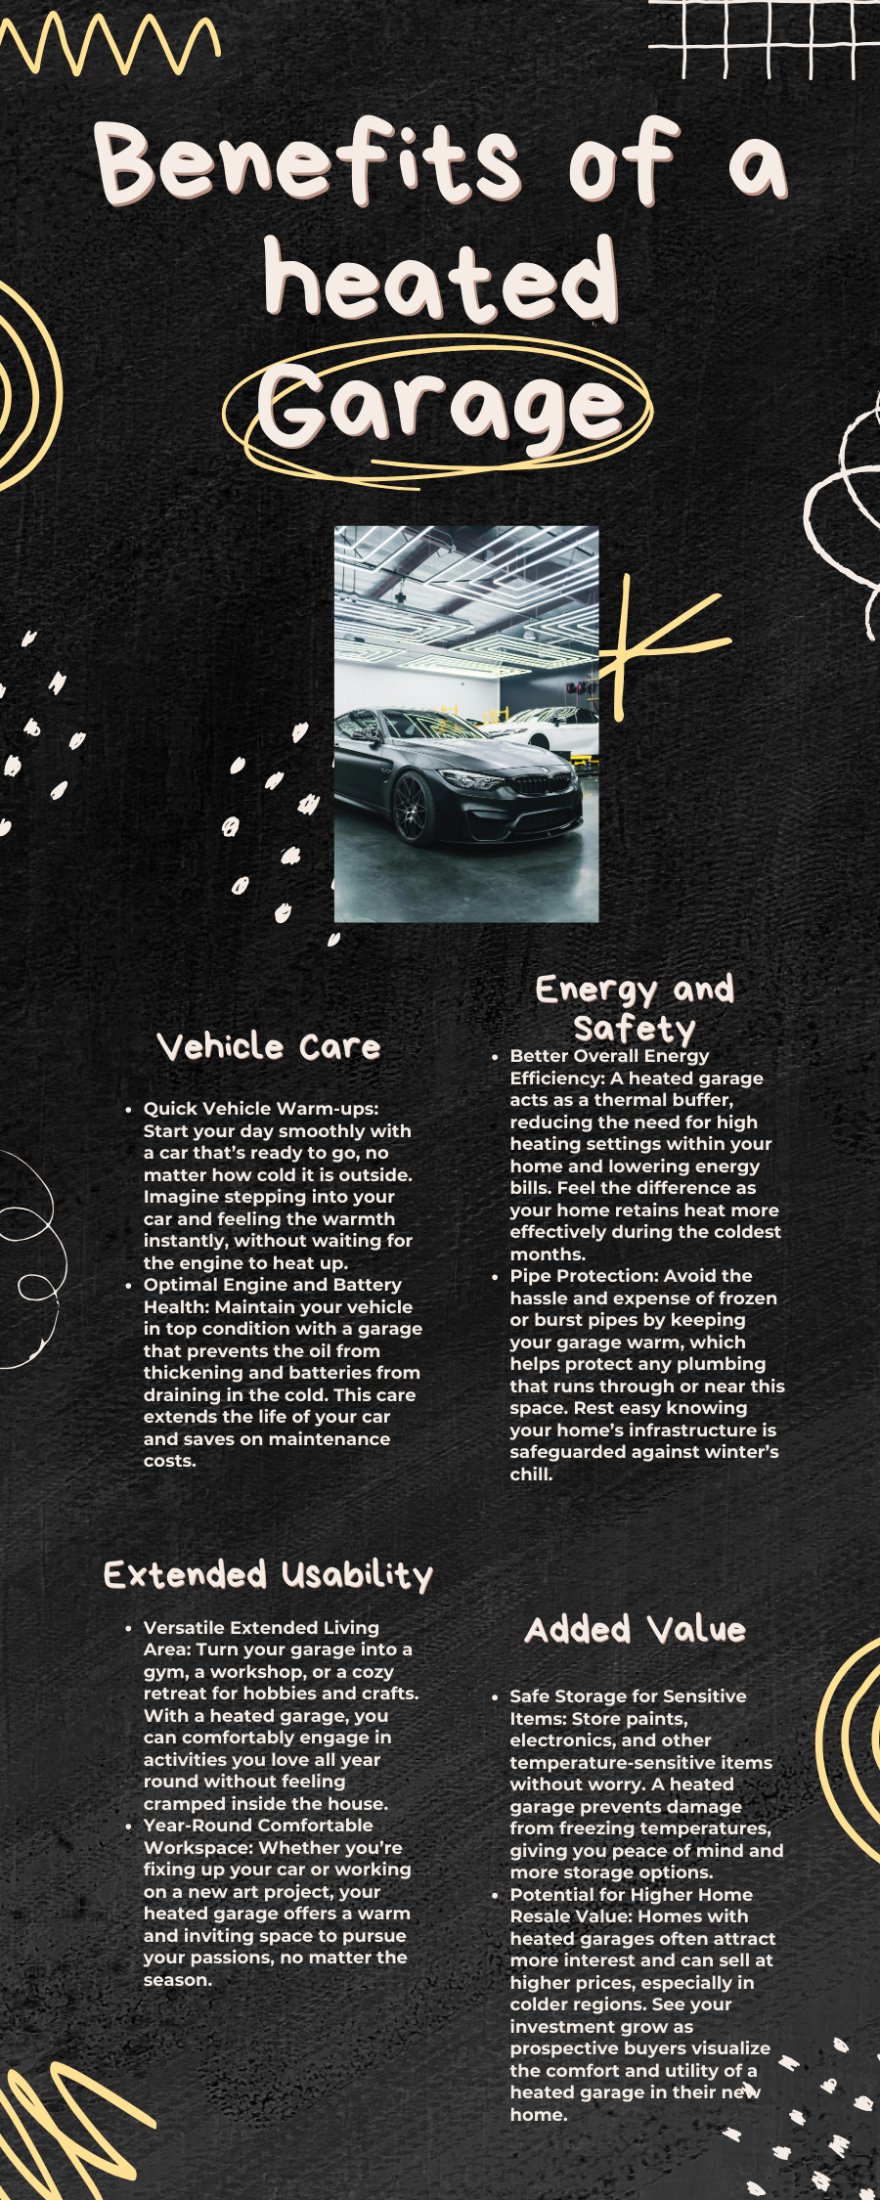 Infographic explaining the benefits of heated garages in Regina homes for sale with a heated garage. Sections include enhanced vehicle care with quick warm-ups and better engine health, improved home energy efficiency with thermal buffering and pipe protection, expanded living space usable year-round, and increased home value through safe storage and potential higher resale value. Visuals include icons of a car, a house, a garage workspace, and storage shelves, with warm and cool color contrasts.